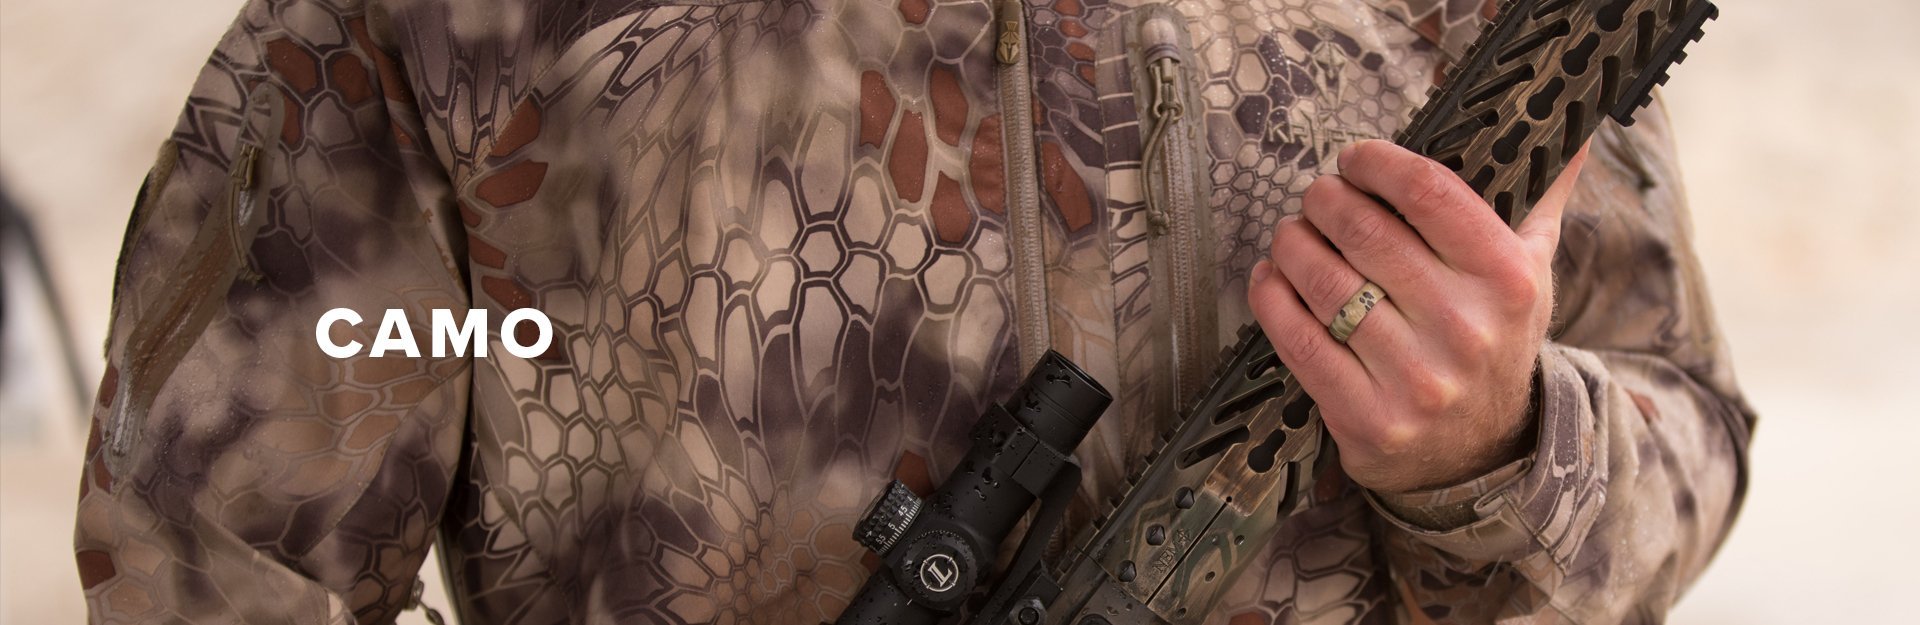 Camo, man holding a rifle while dressed in Kryptek camo